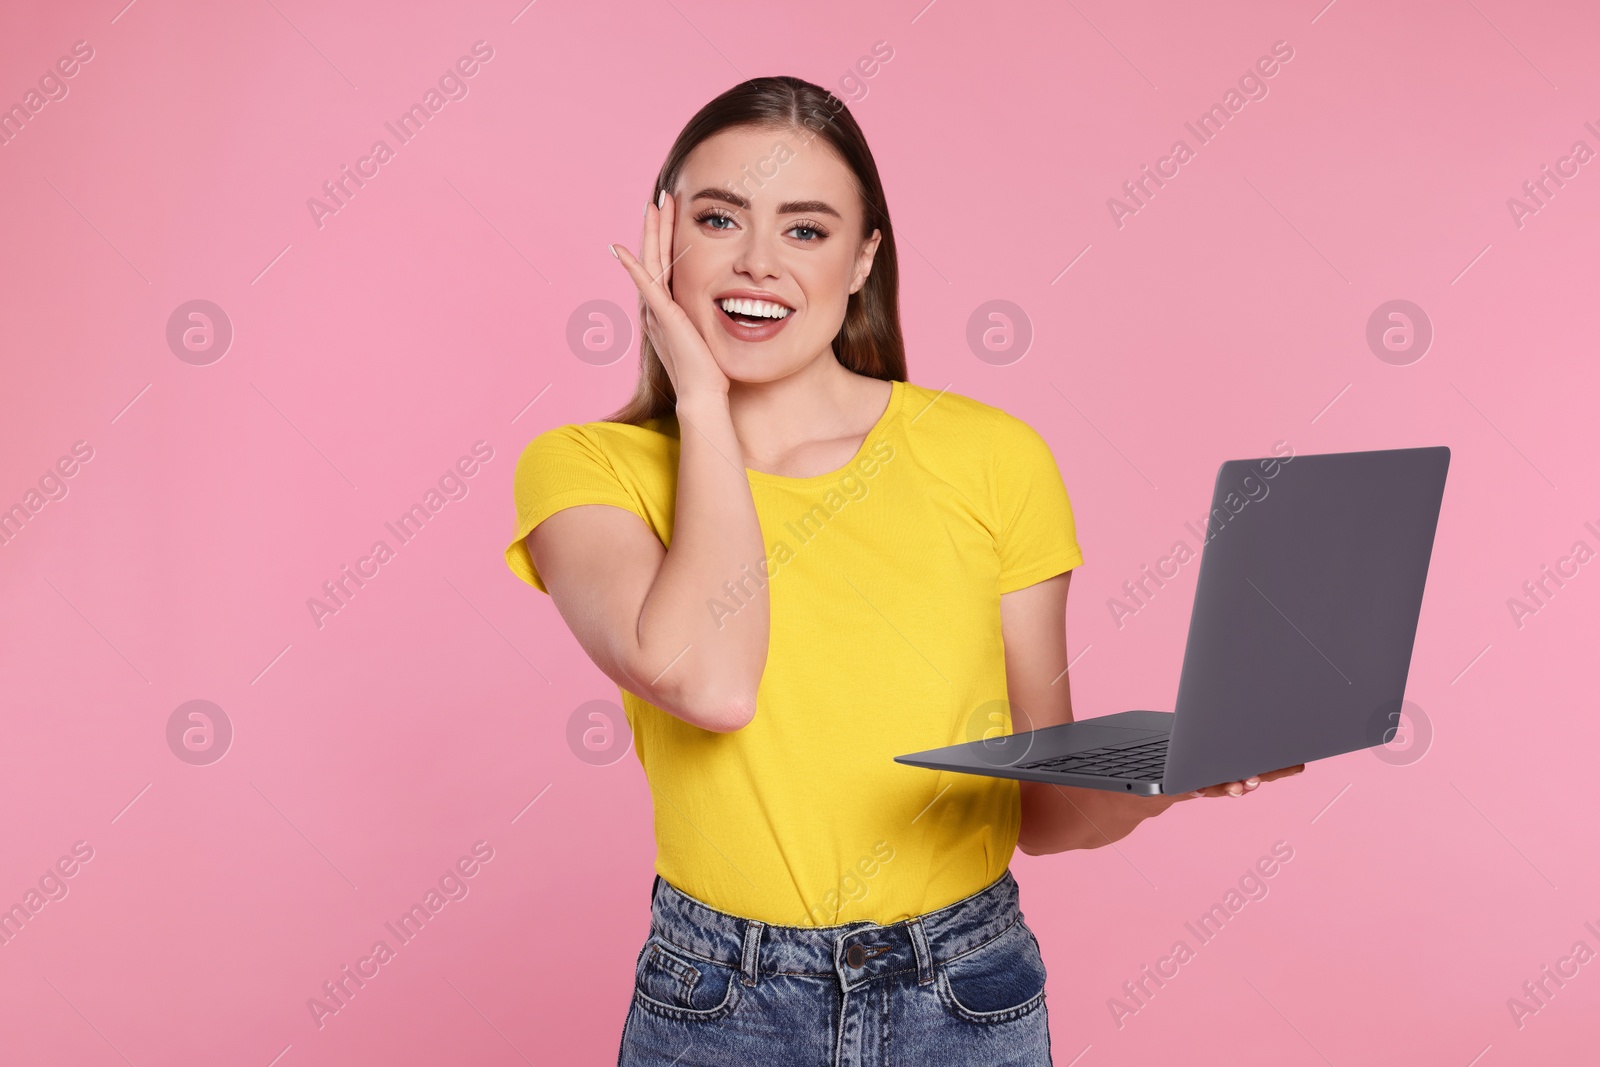 Photo of Happy woman with laptop on pink background